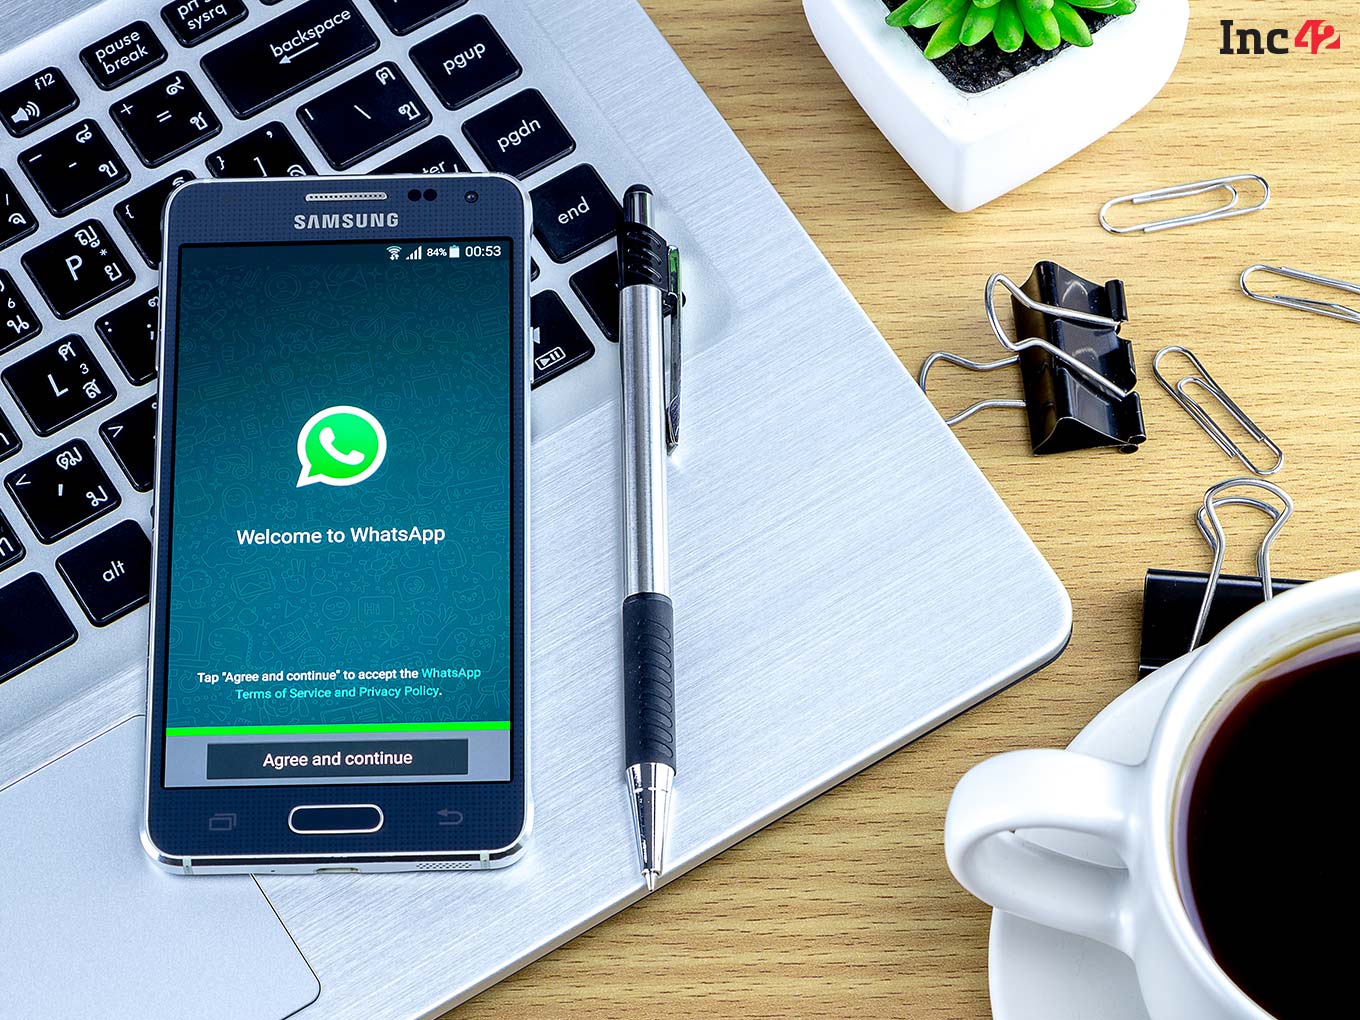 WhatsApp To Launch Its First Revenue-Generating Product In India